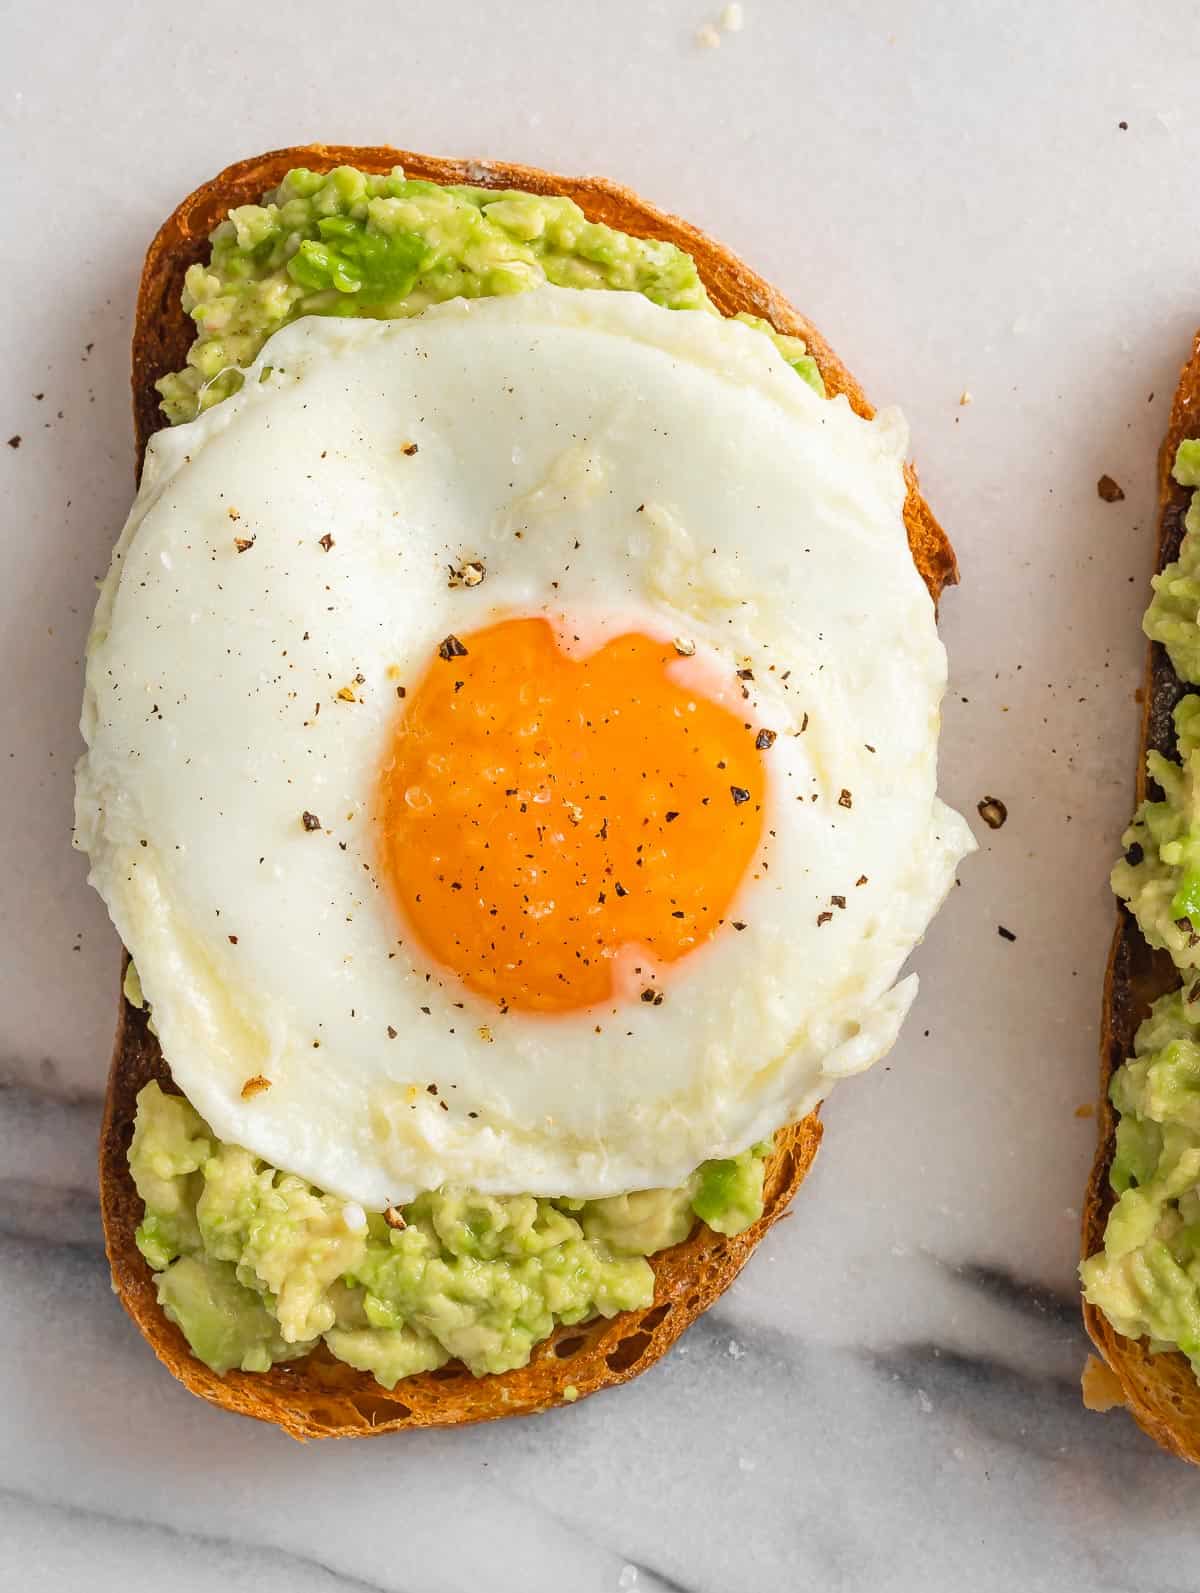 Avocado on toast bread topped with a fried egg